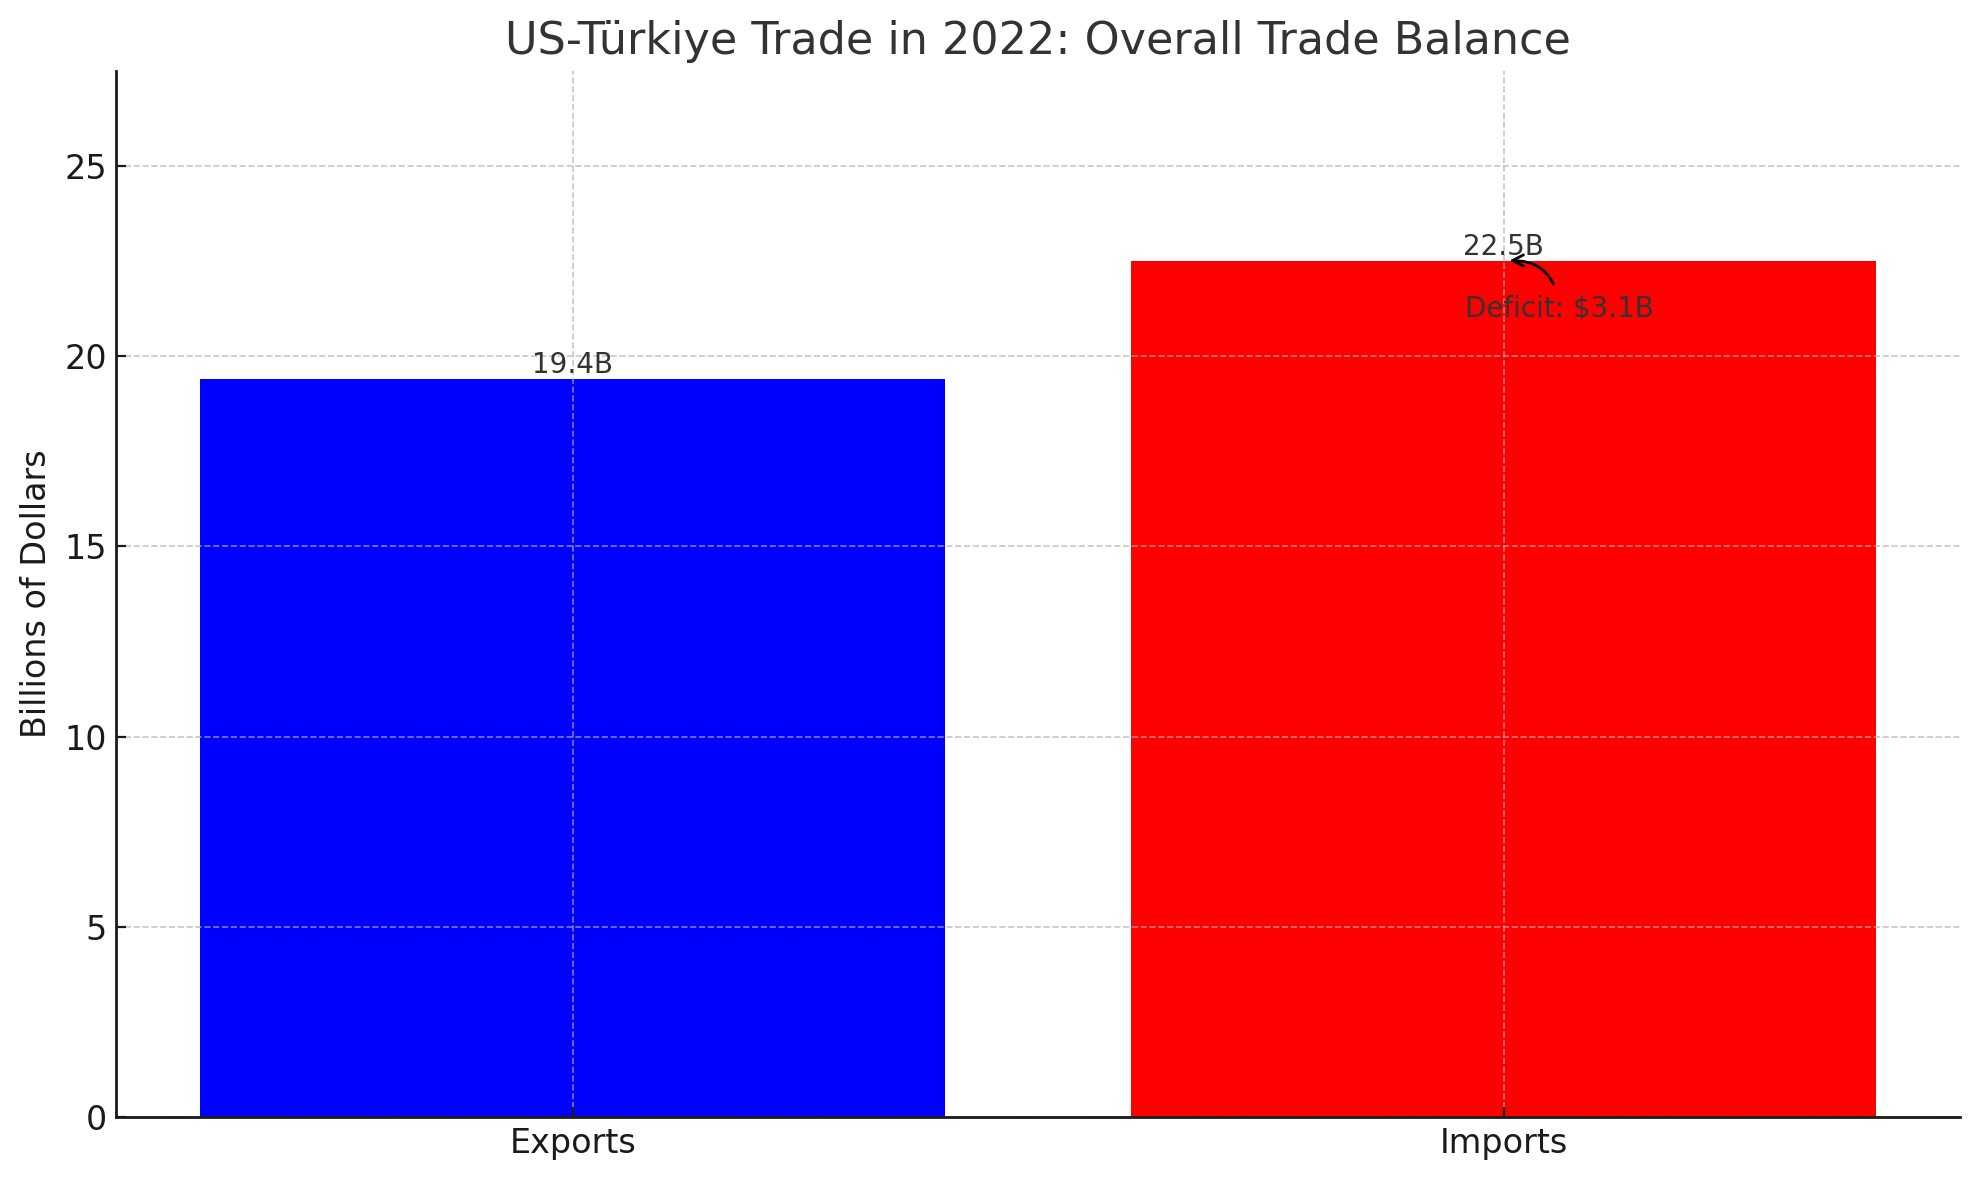 Chart illustrates the overall trade balance between the United States and the Republic of Türkiye